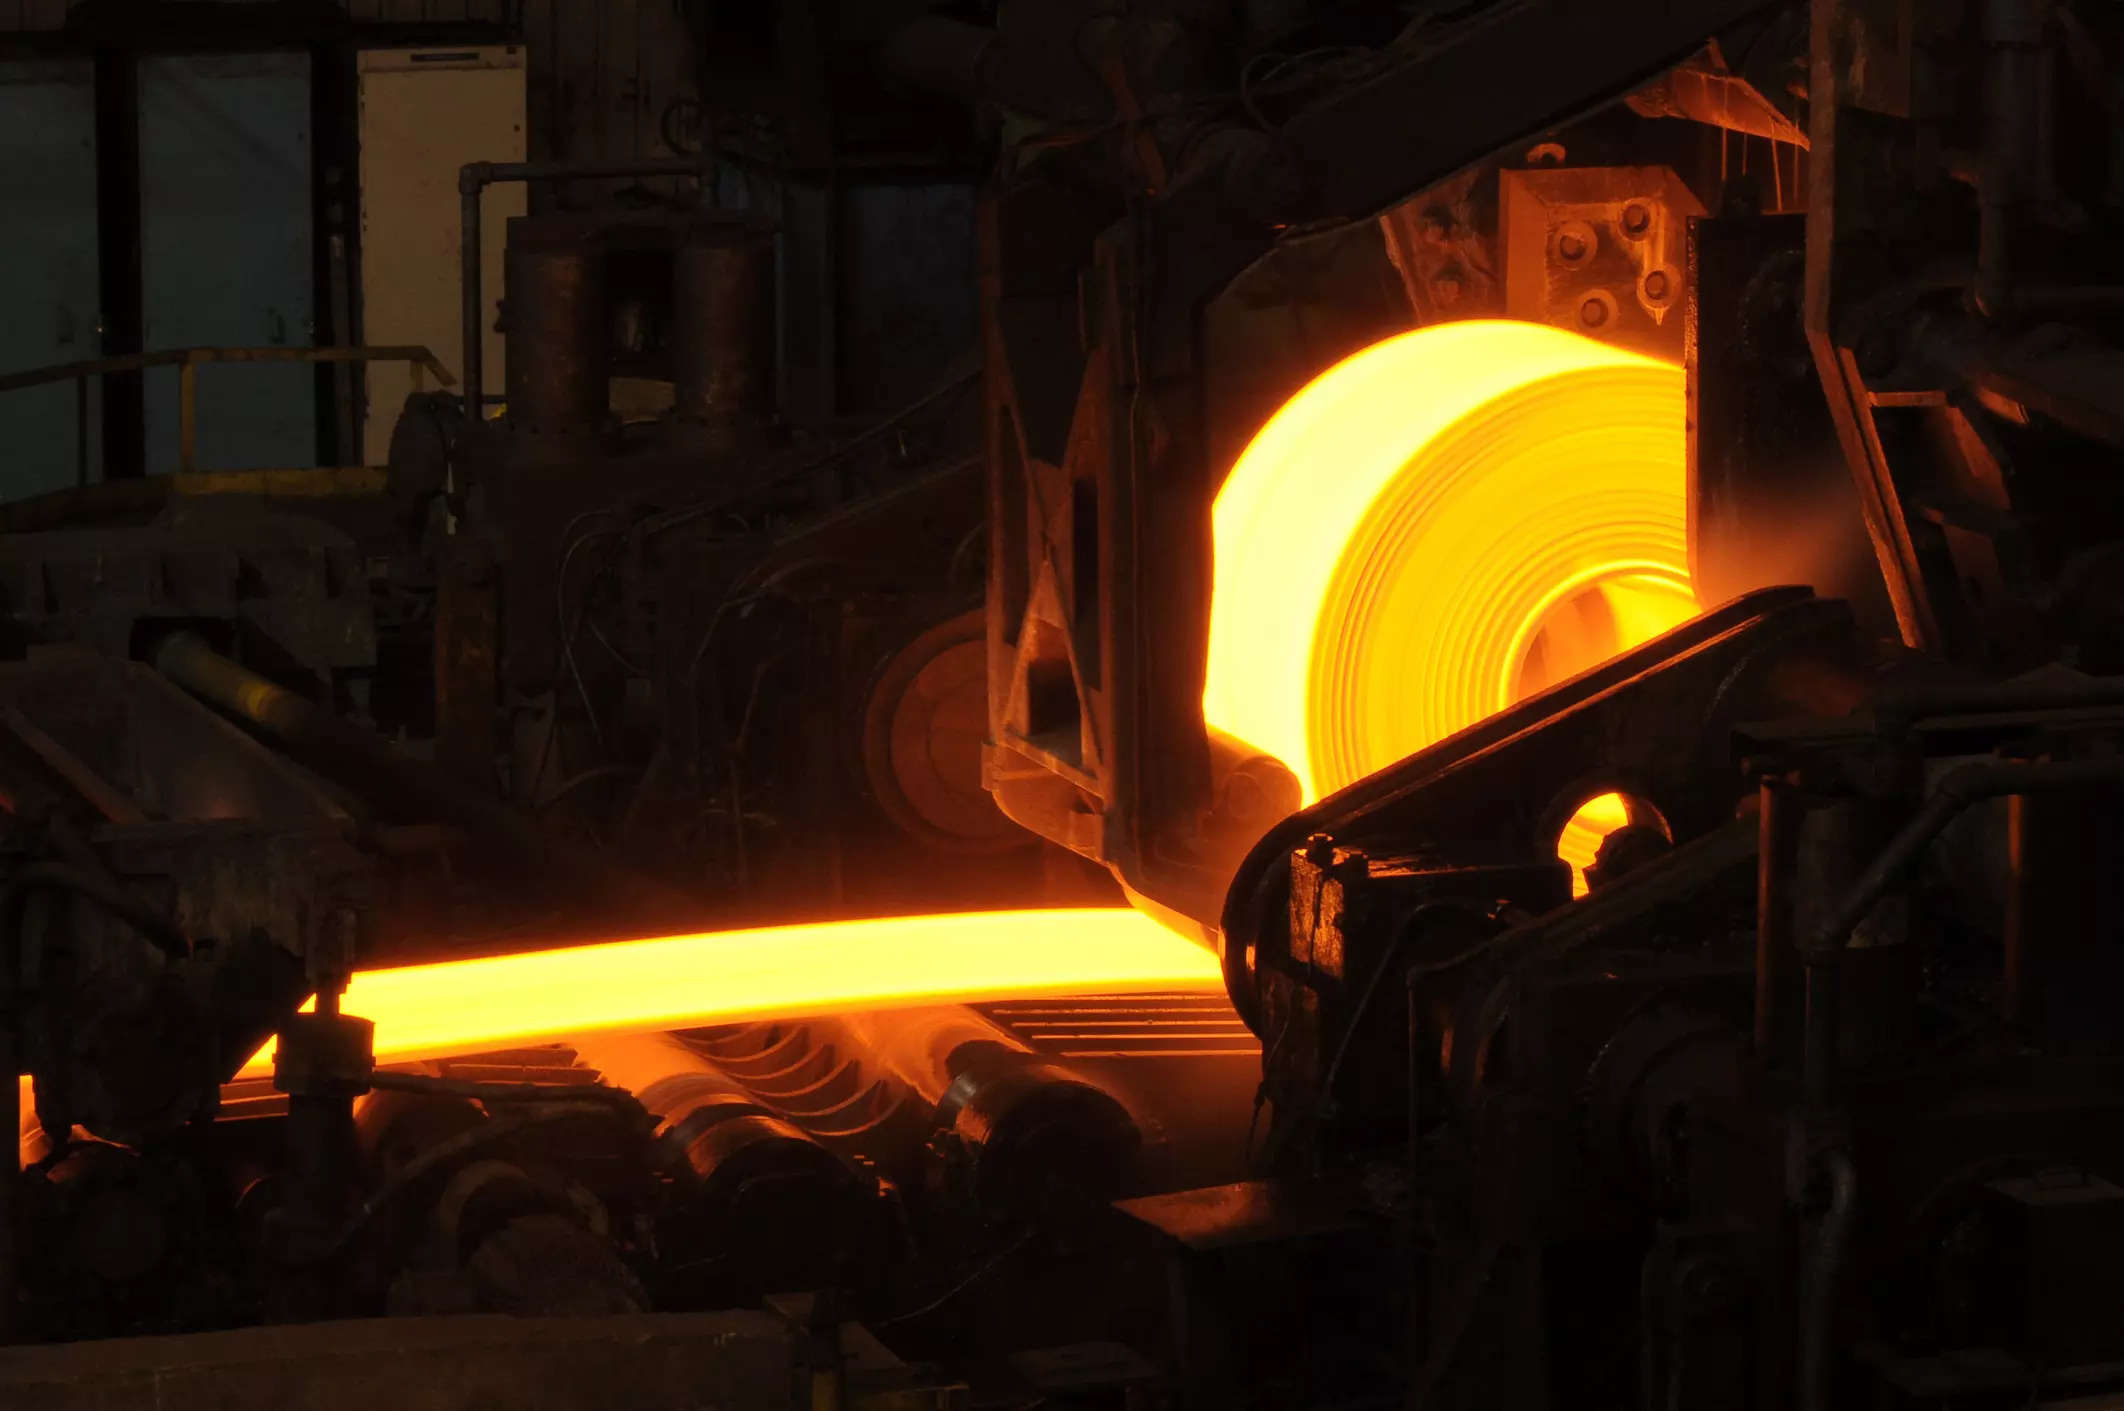  For the first nine months of the year, the market was in a 161,000 tonne deficit compared with a 239,000 tonne deficit in the same period a year earlier, the International Copper Study Group said.